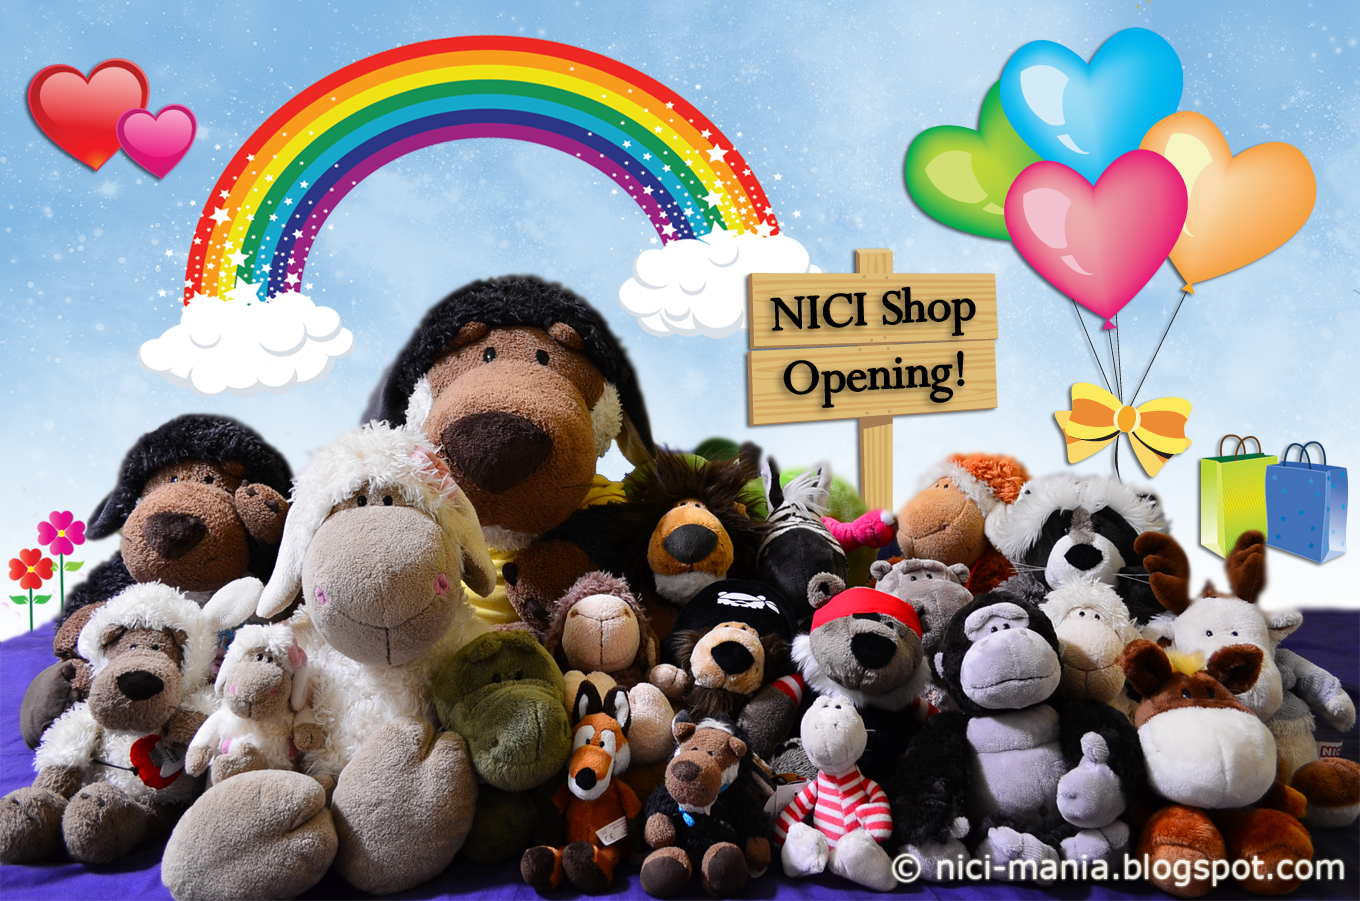 we received an email from NICI Malaysia telling us that the NICI shop ...